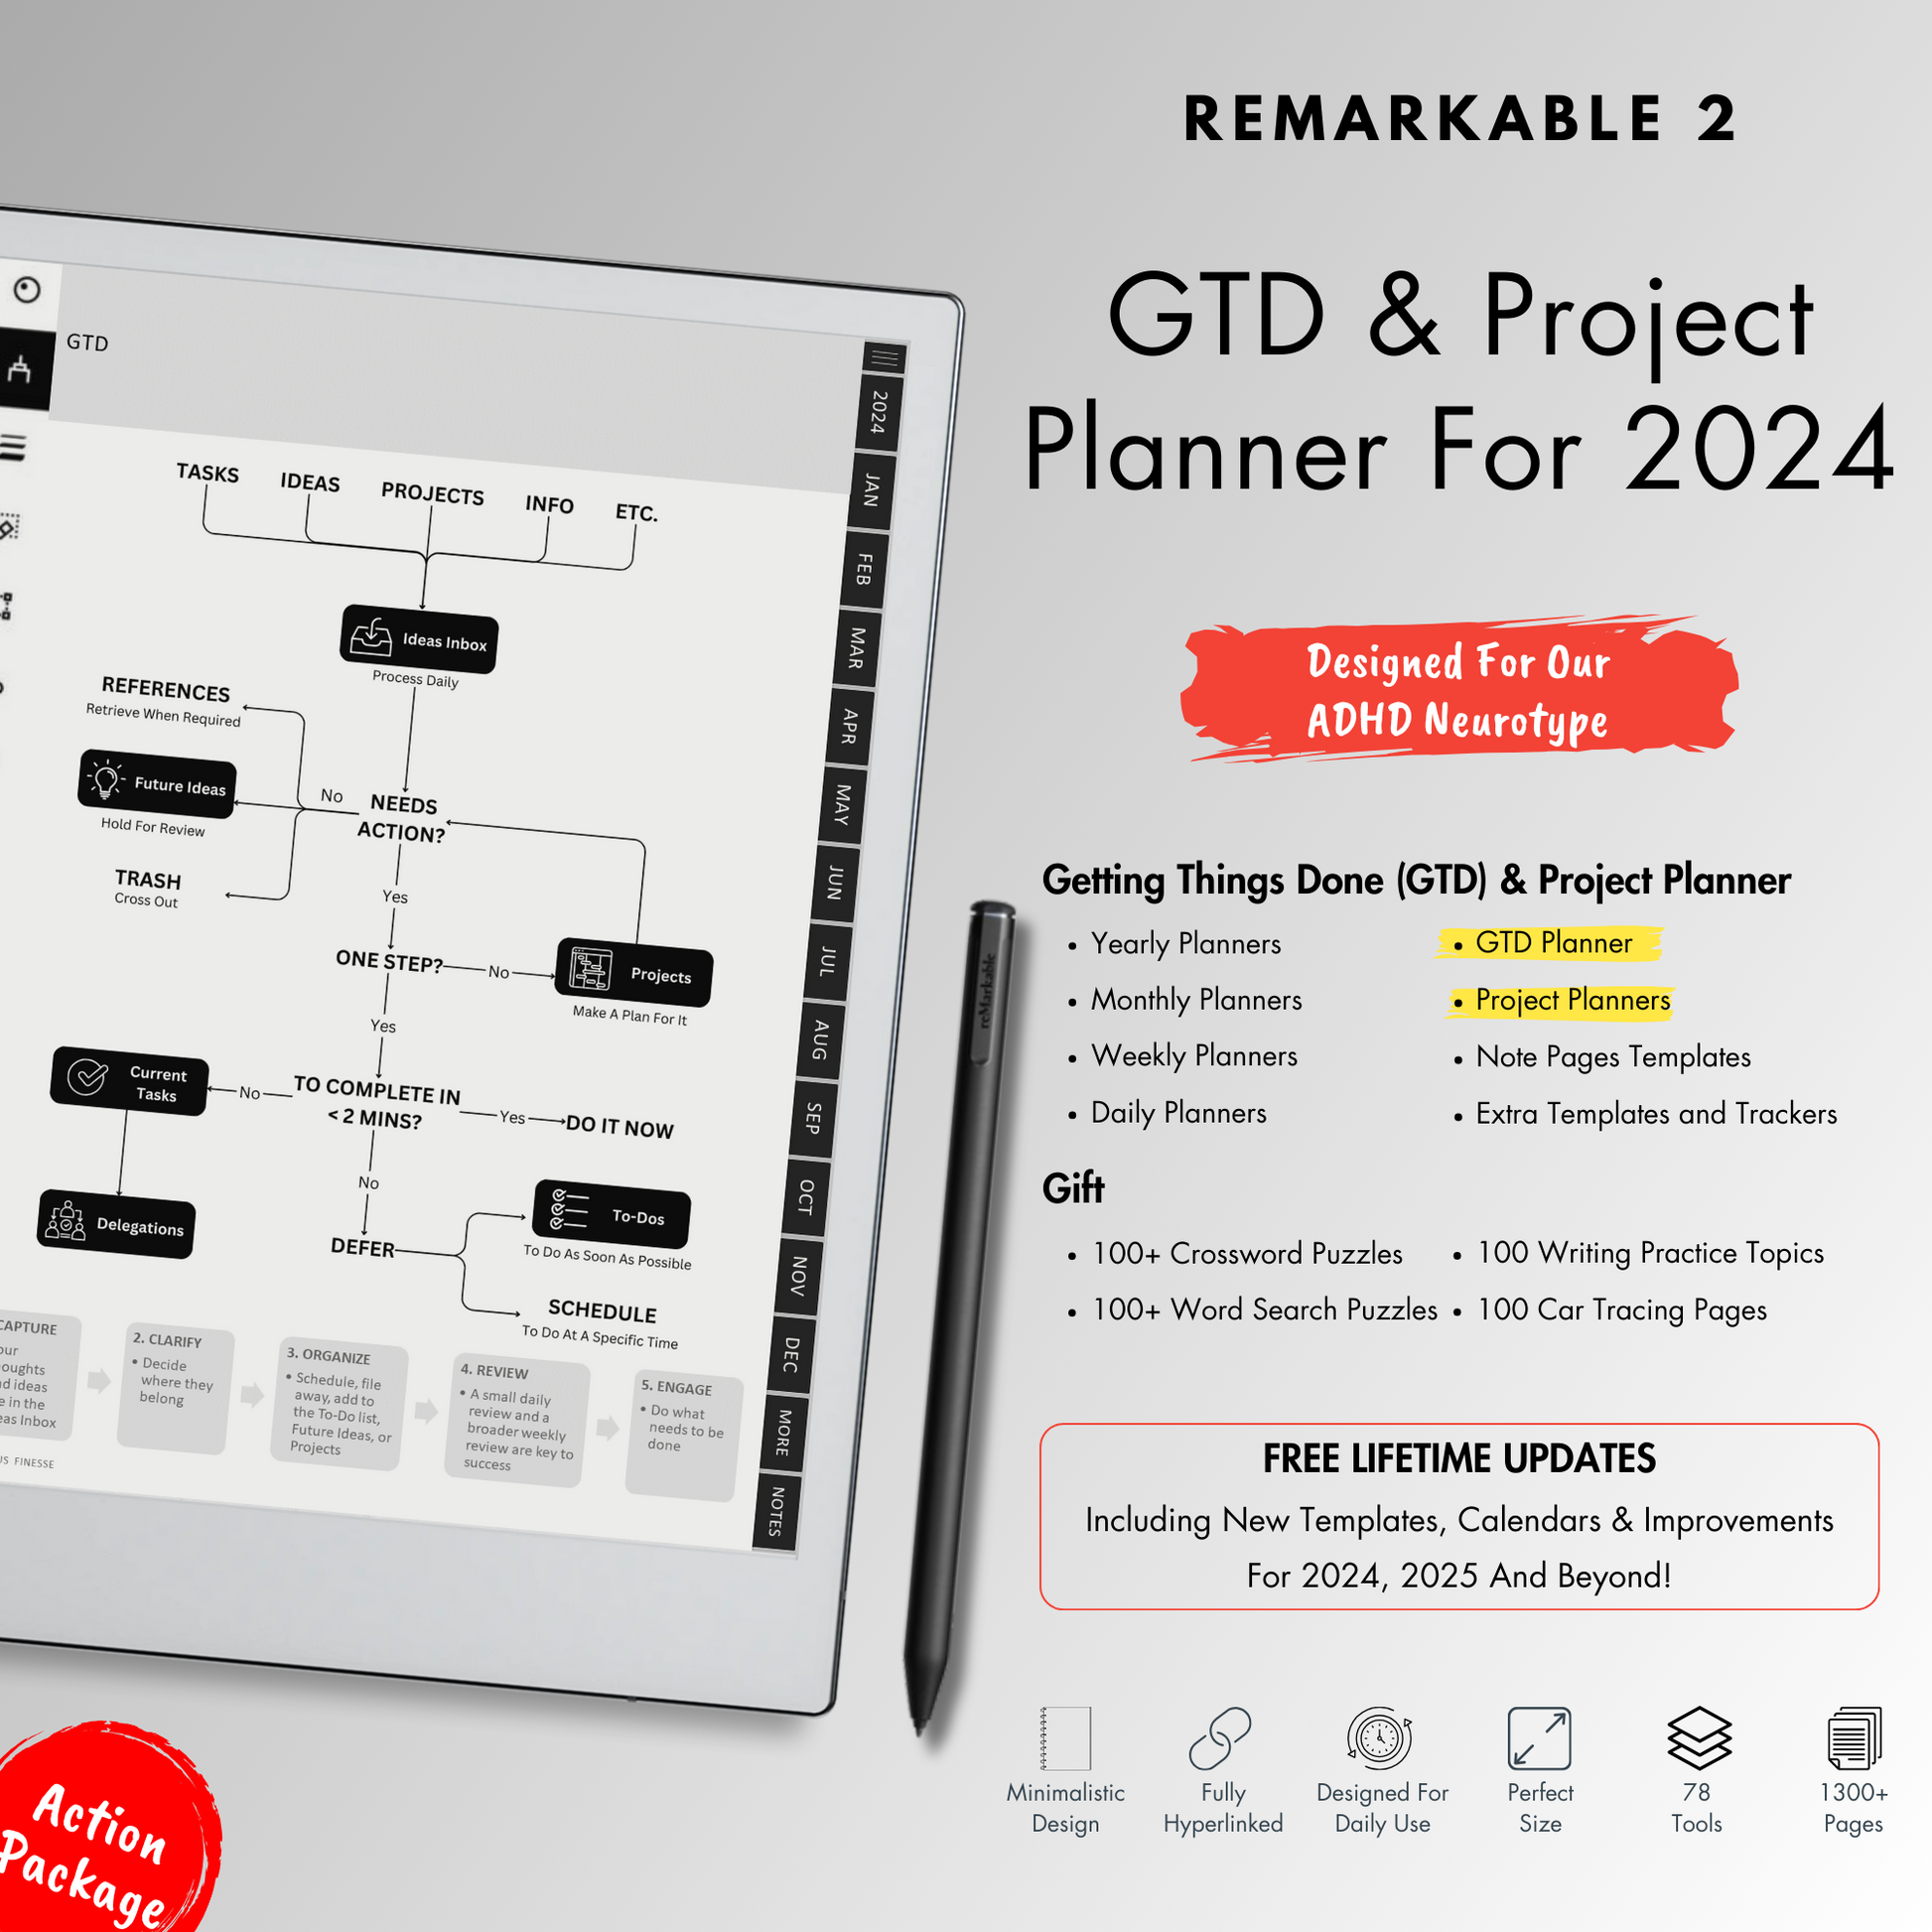 Getting Things Done and Project Planner 2024 for Remarkable 2.